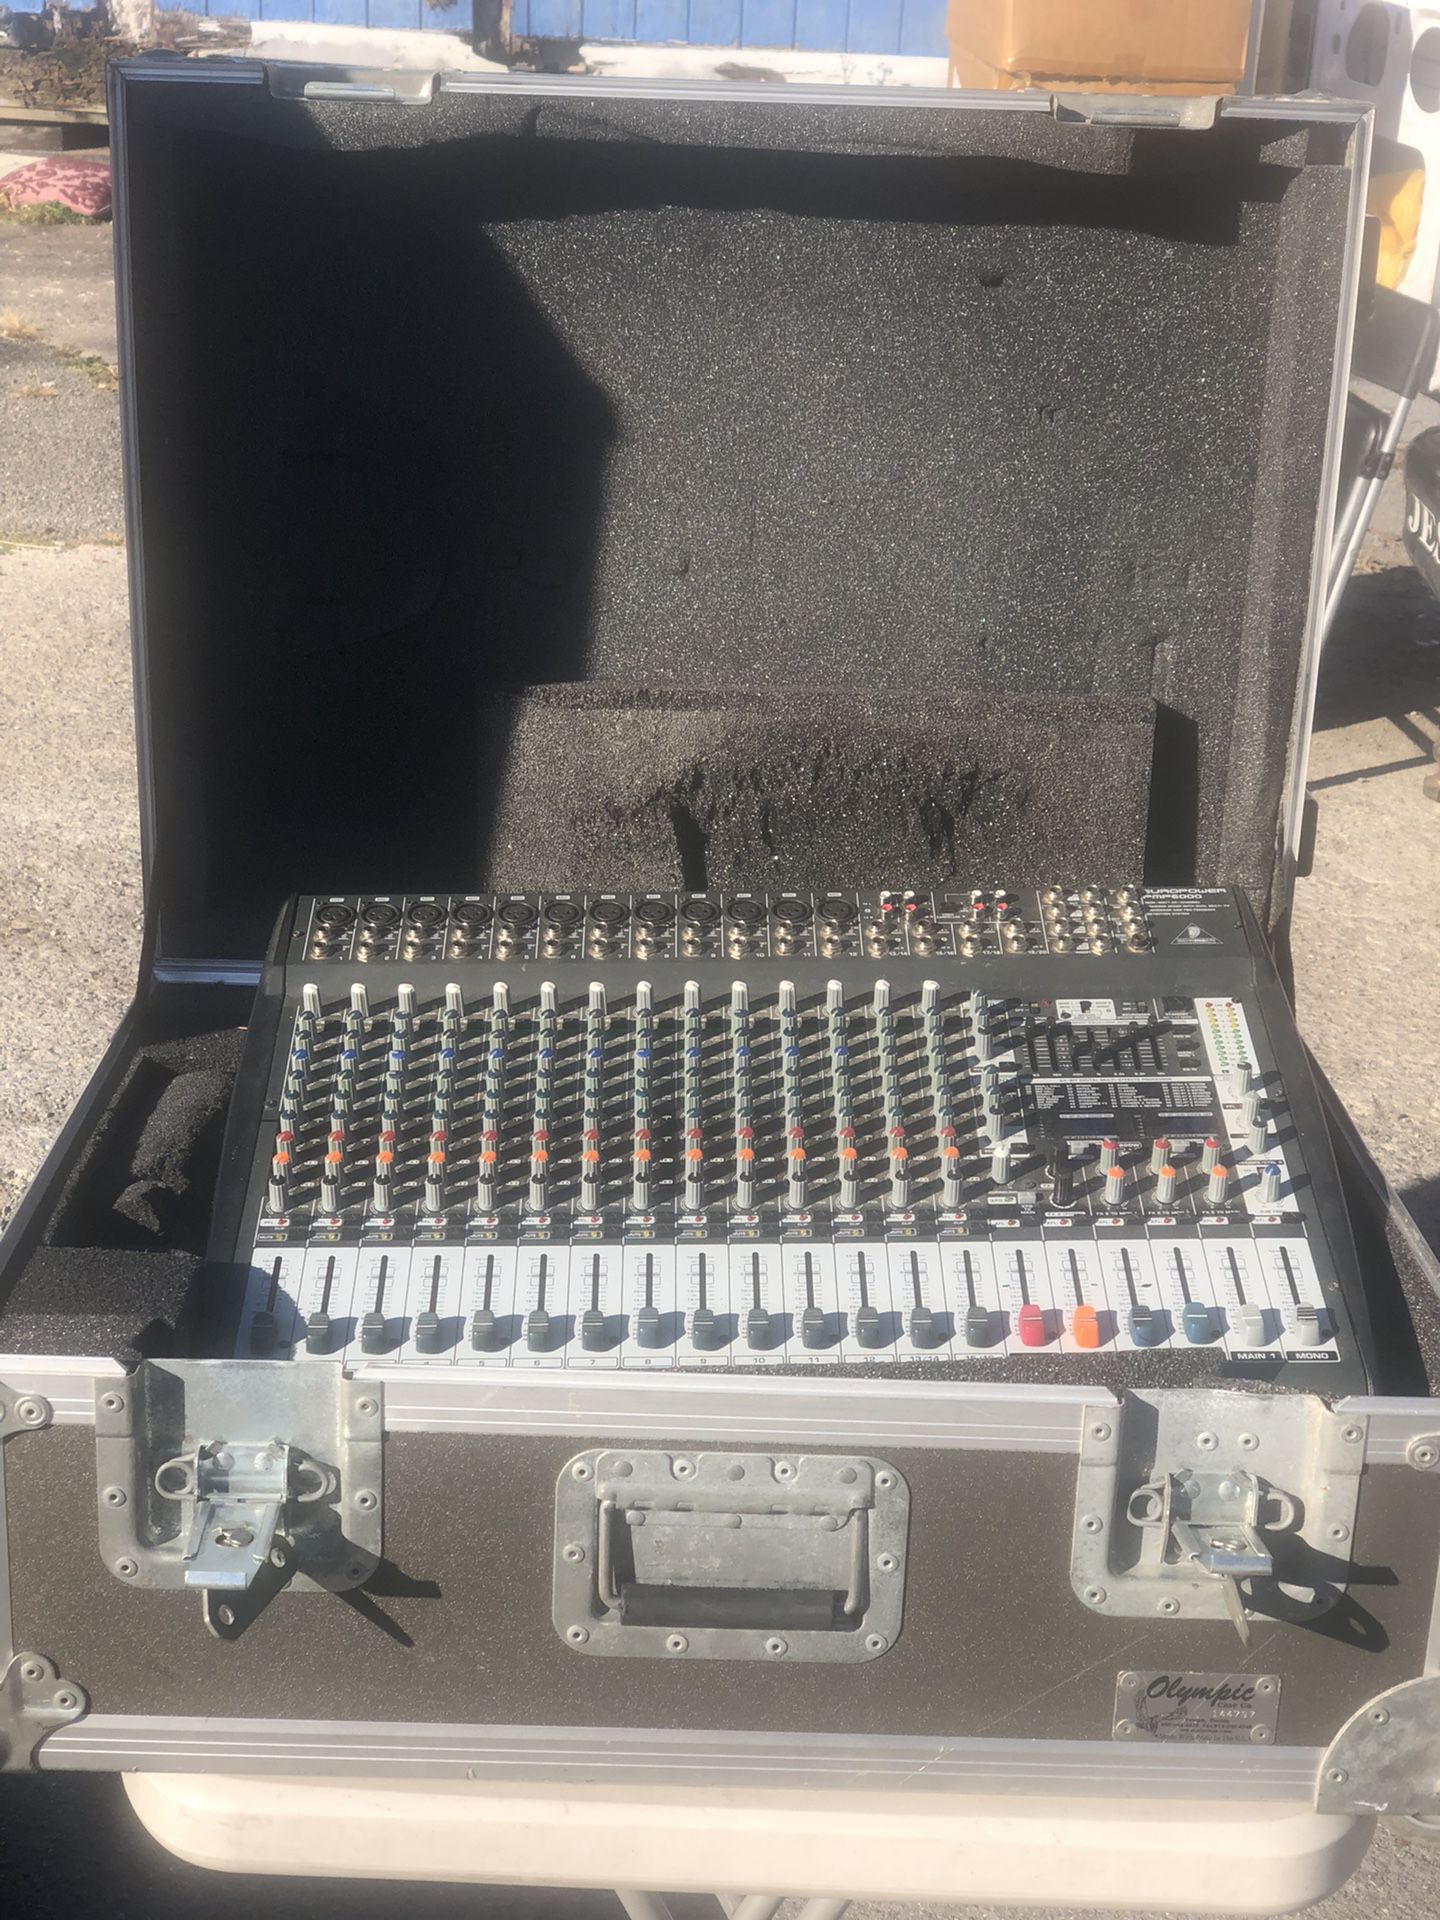 Europower Pmp 6000 Mixer Board And Case 